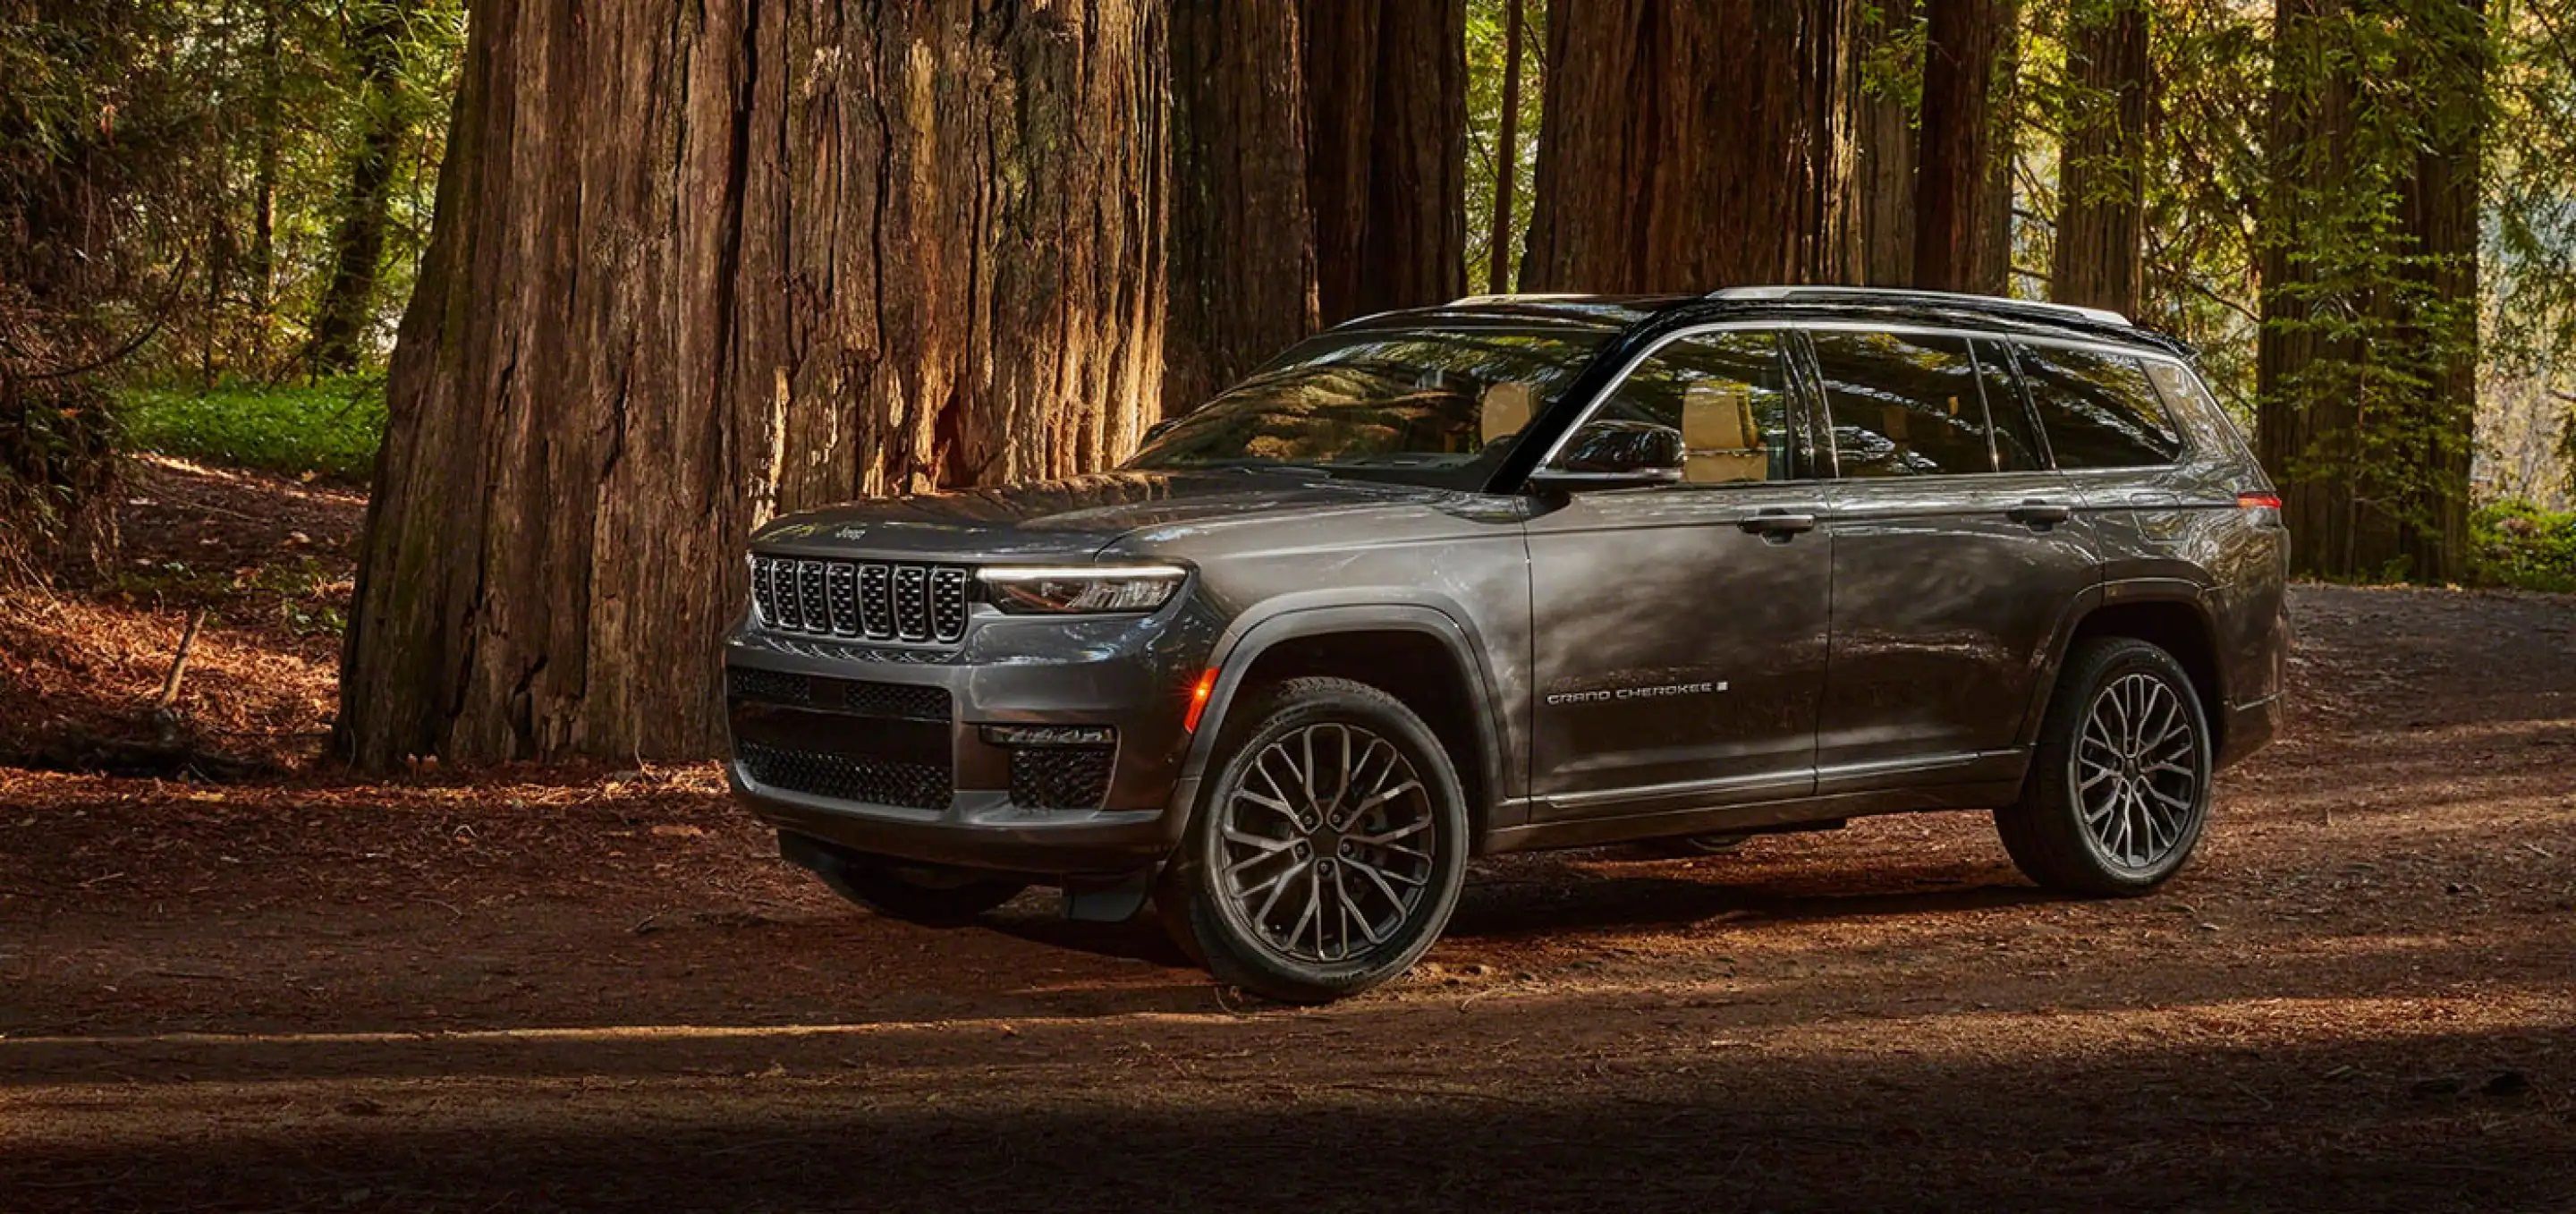 2022 Jeep Grand Cherokee in the woods. 